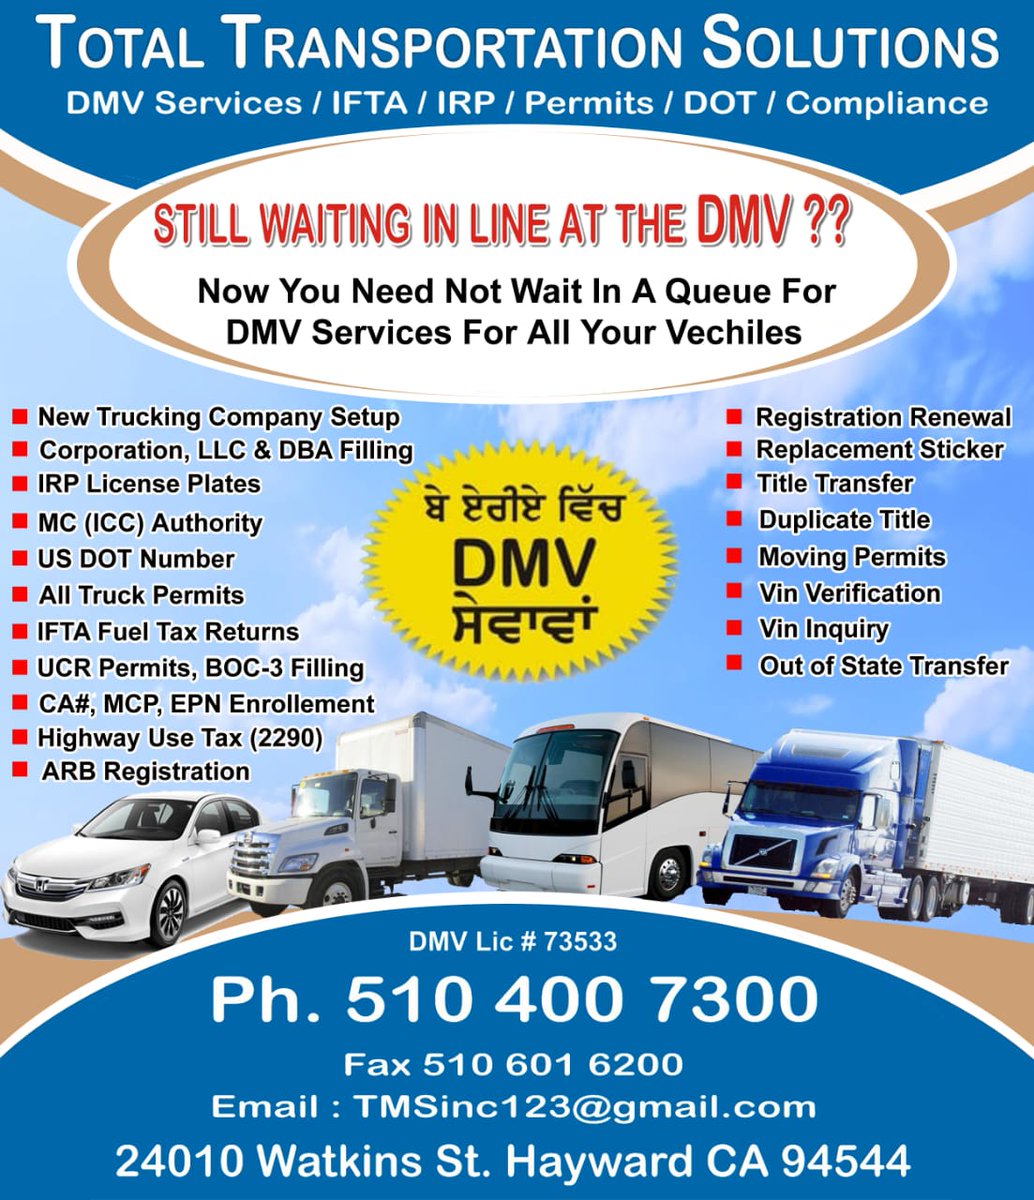 For more details contact at 510 400 7300 
Email at tmsinc123@gmail.com#total #totaltransportsolutions #transportsolutions #tms #tts #dmvservices #dmv #ifta #permits #dot #compliance #tax #highwayusetax #duplicatetitle #otutofstatetransfer #registrationrenewal #vininquiry